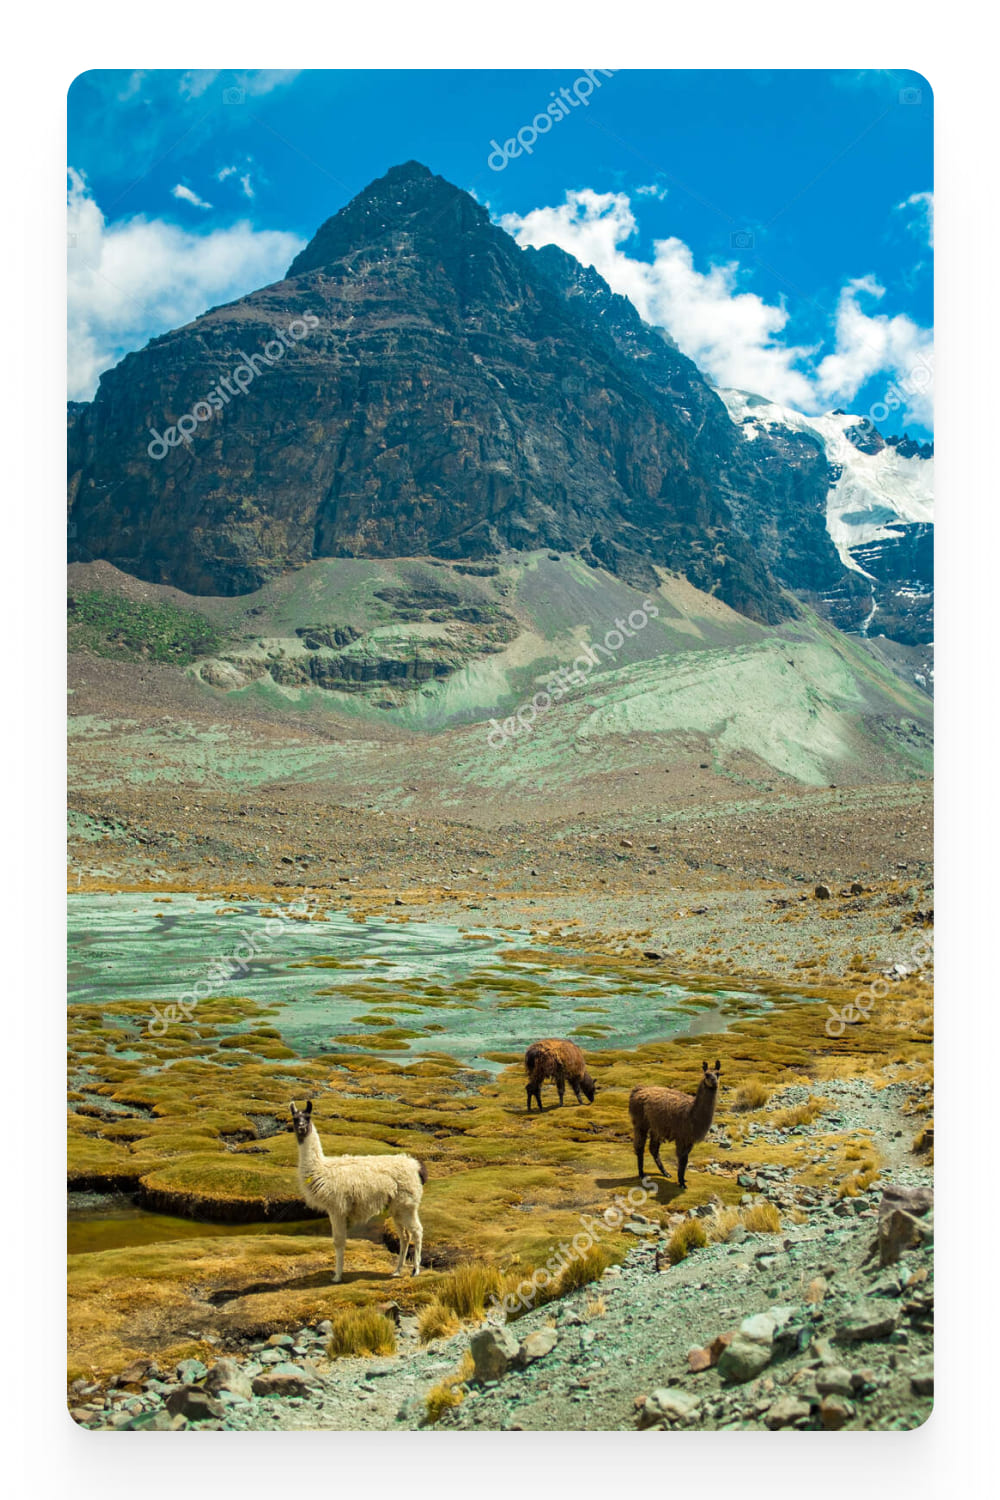 Photo of llamas by the lake in the mountains.